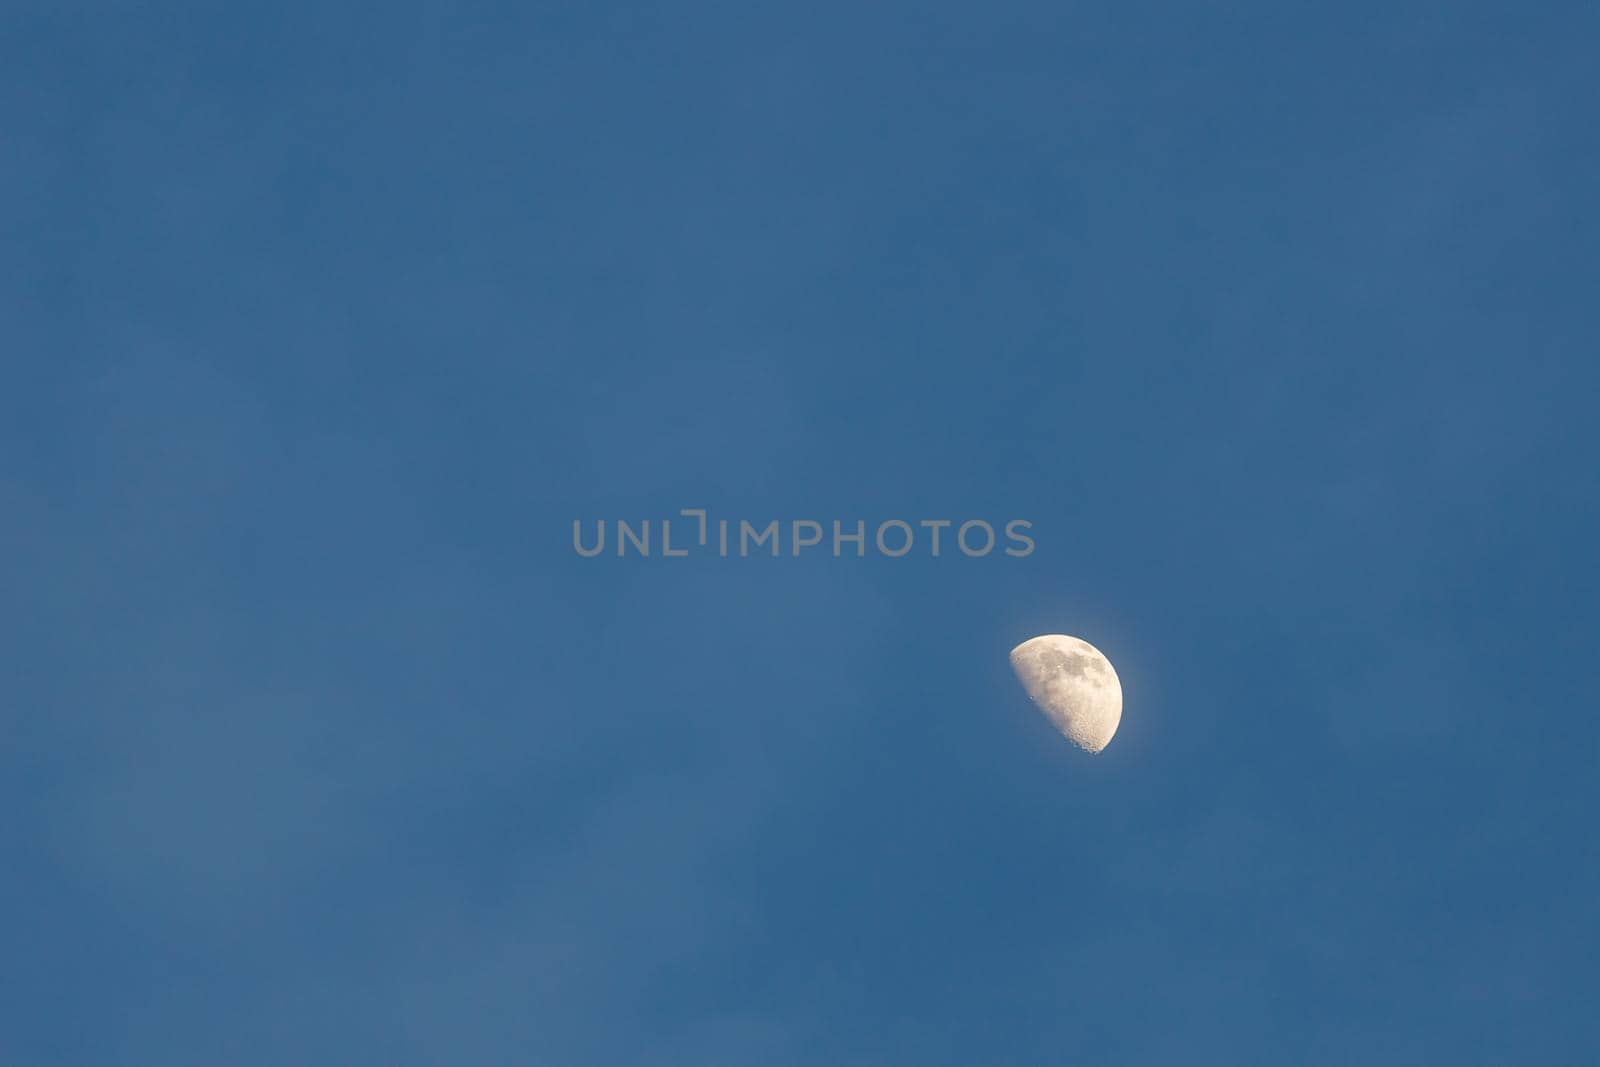 Half-moon in evening sky with faint clouds by colintemple